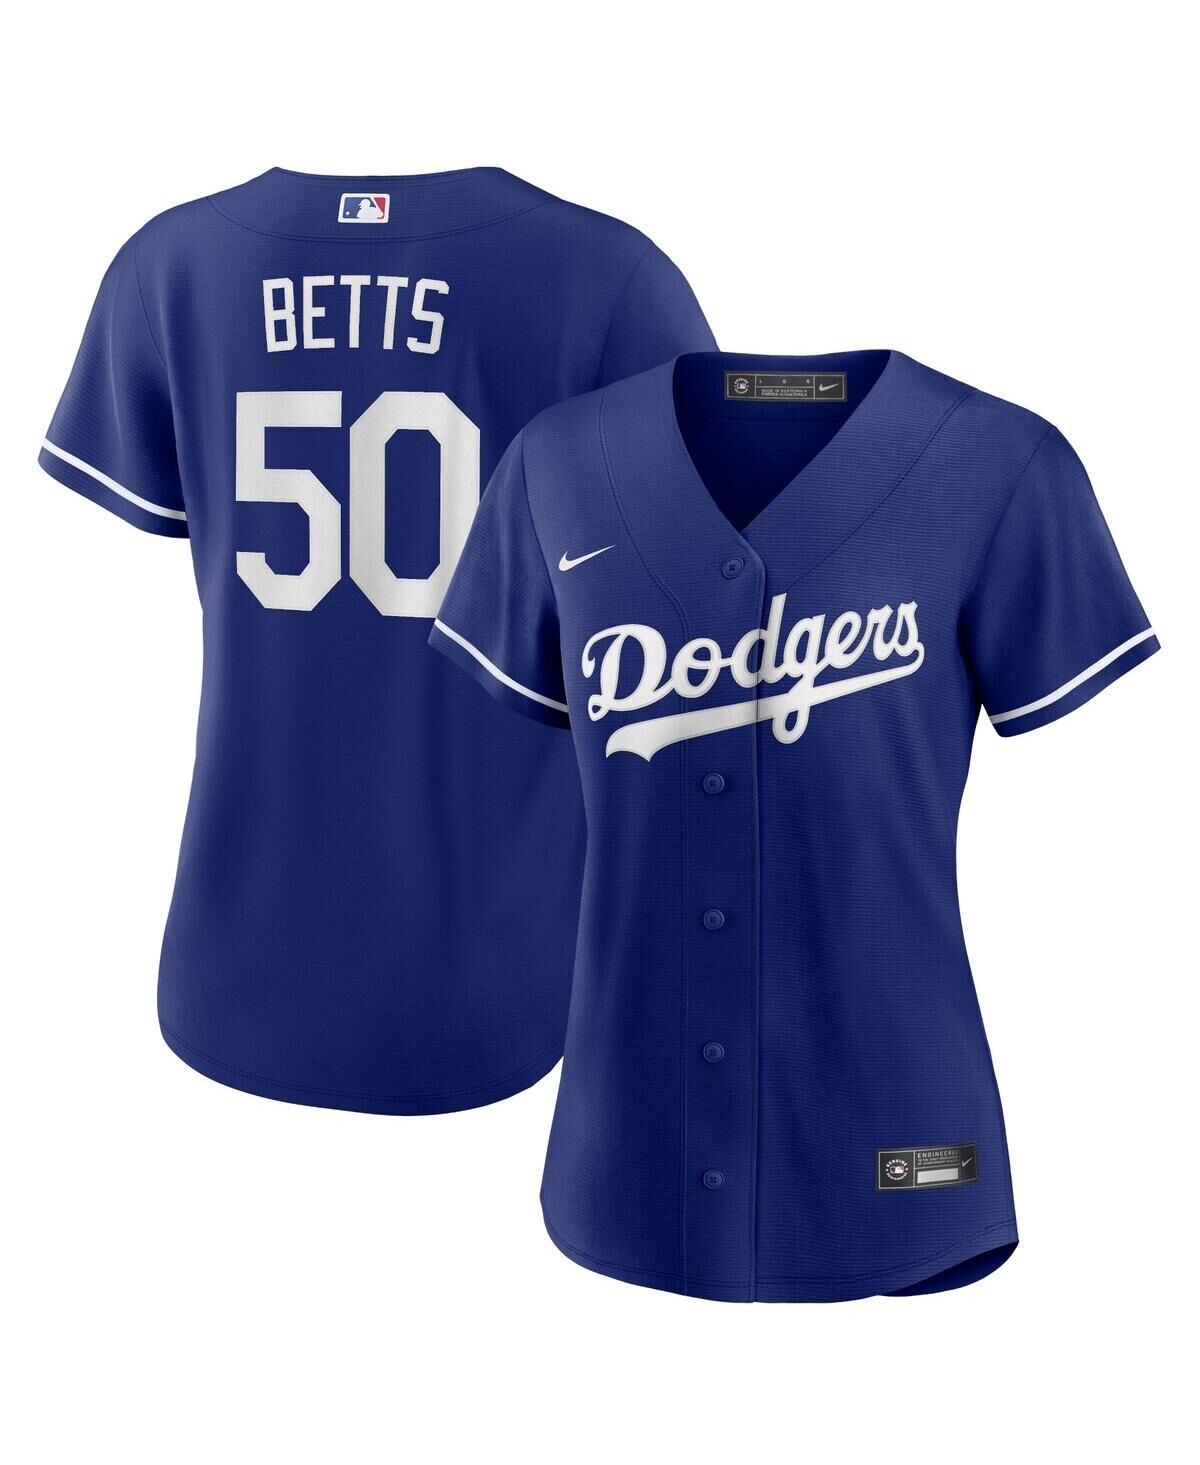 Nike Los Angeles Dodgers Women's Official Player Replica Jersey - Mookie Betts - Royal Blue